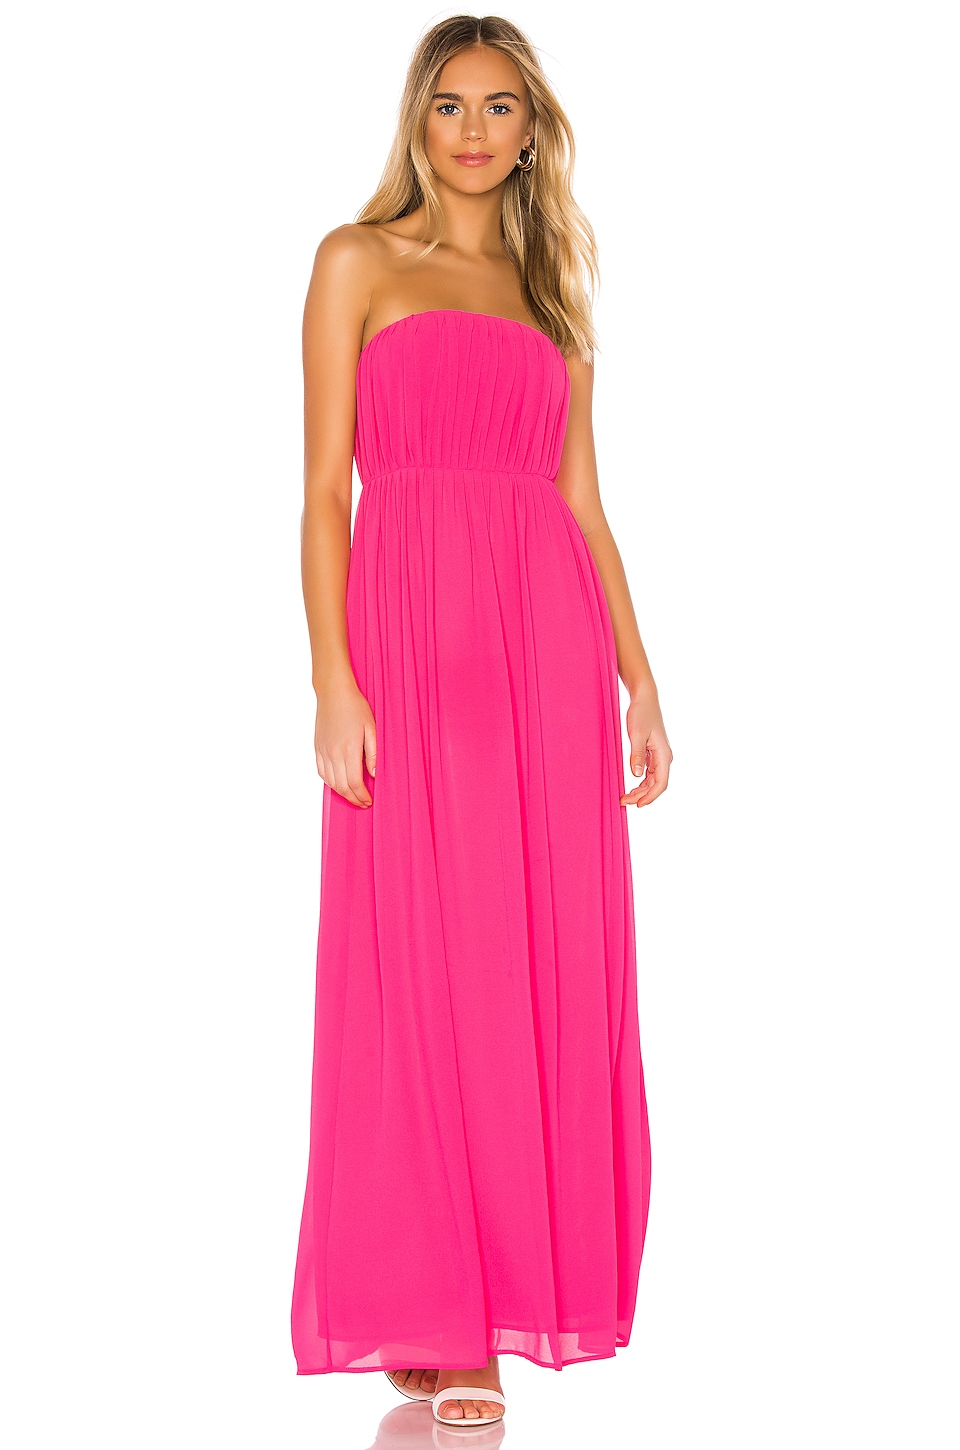 MAJORELLE Eleanora Gown in Pink